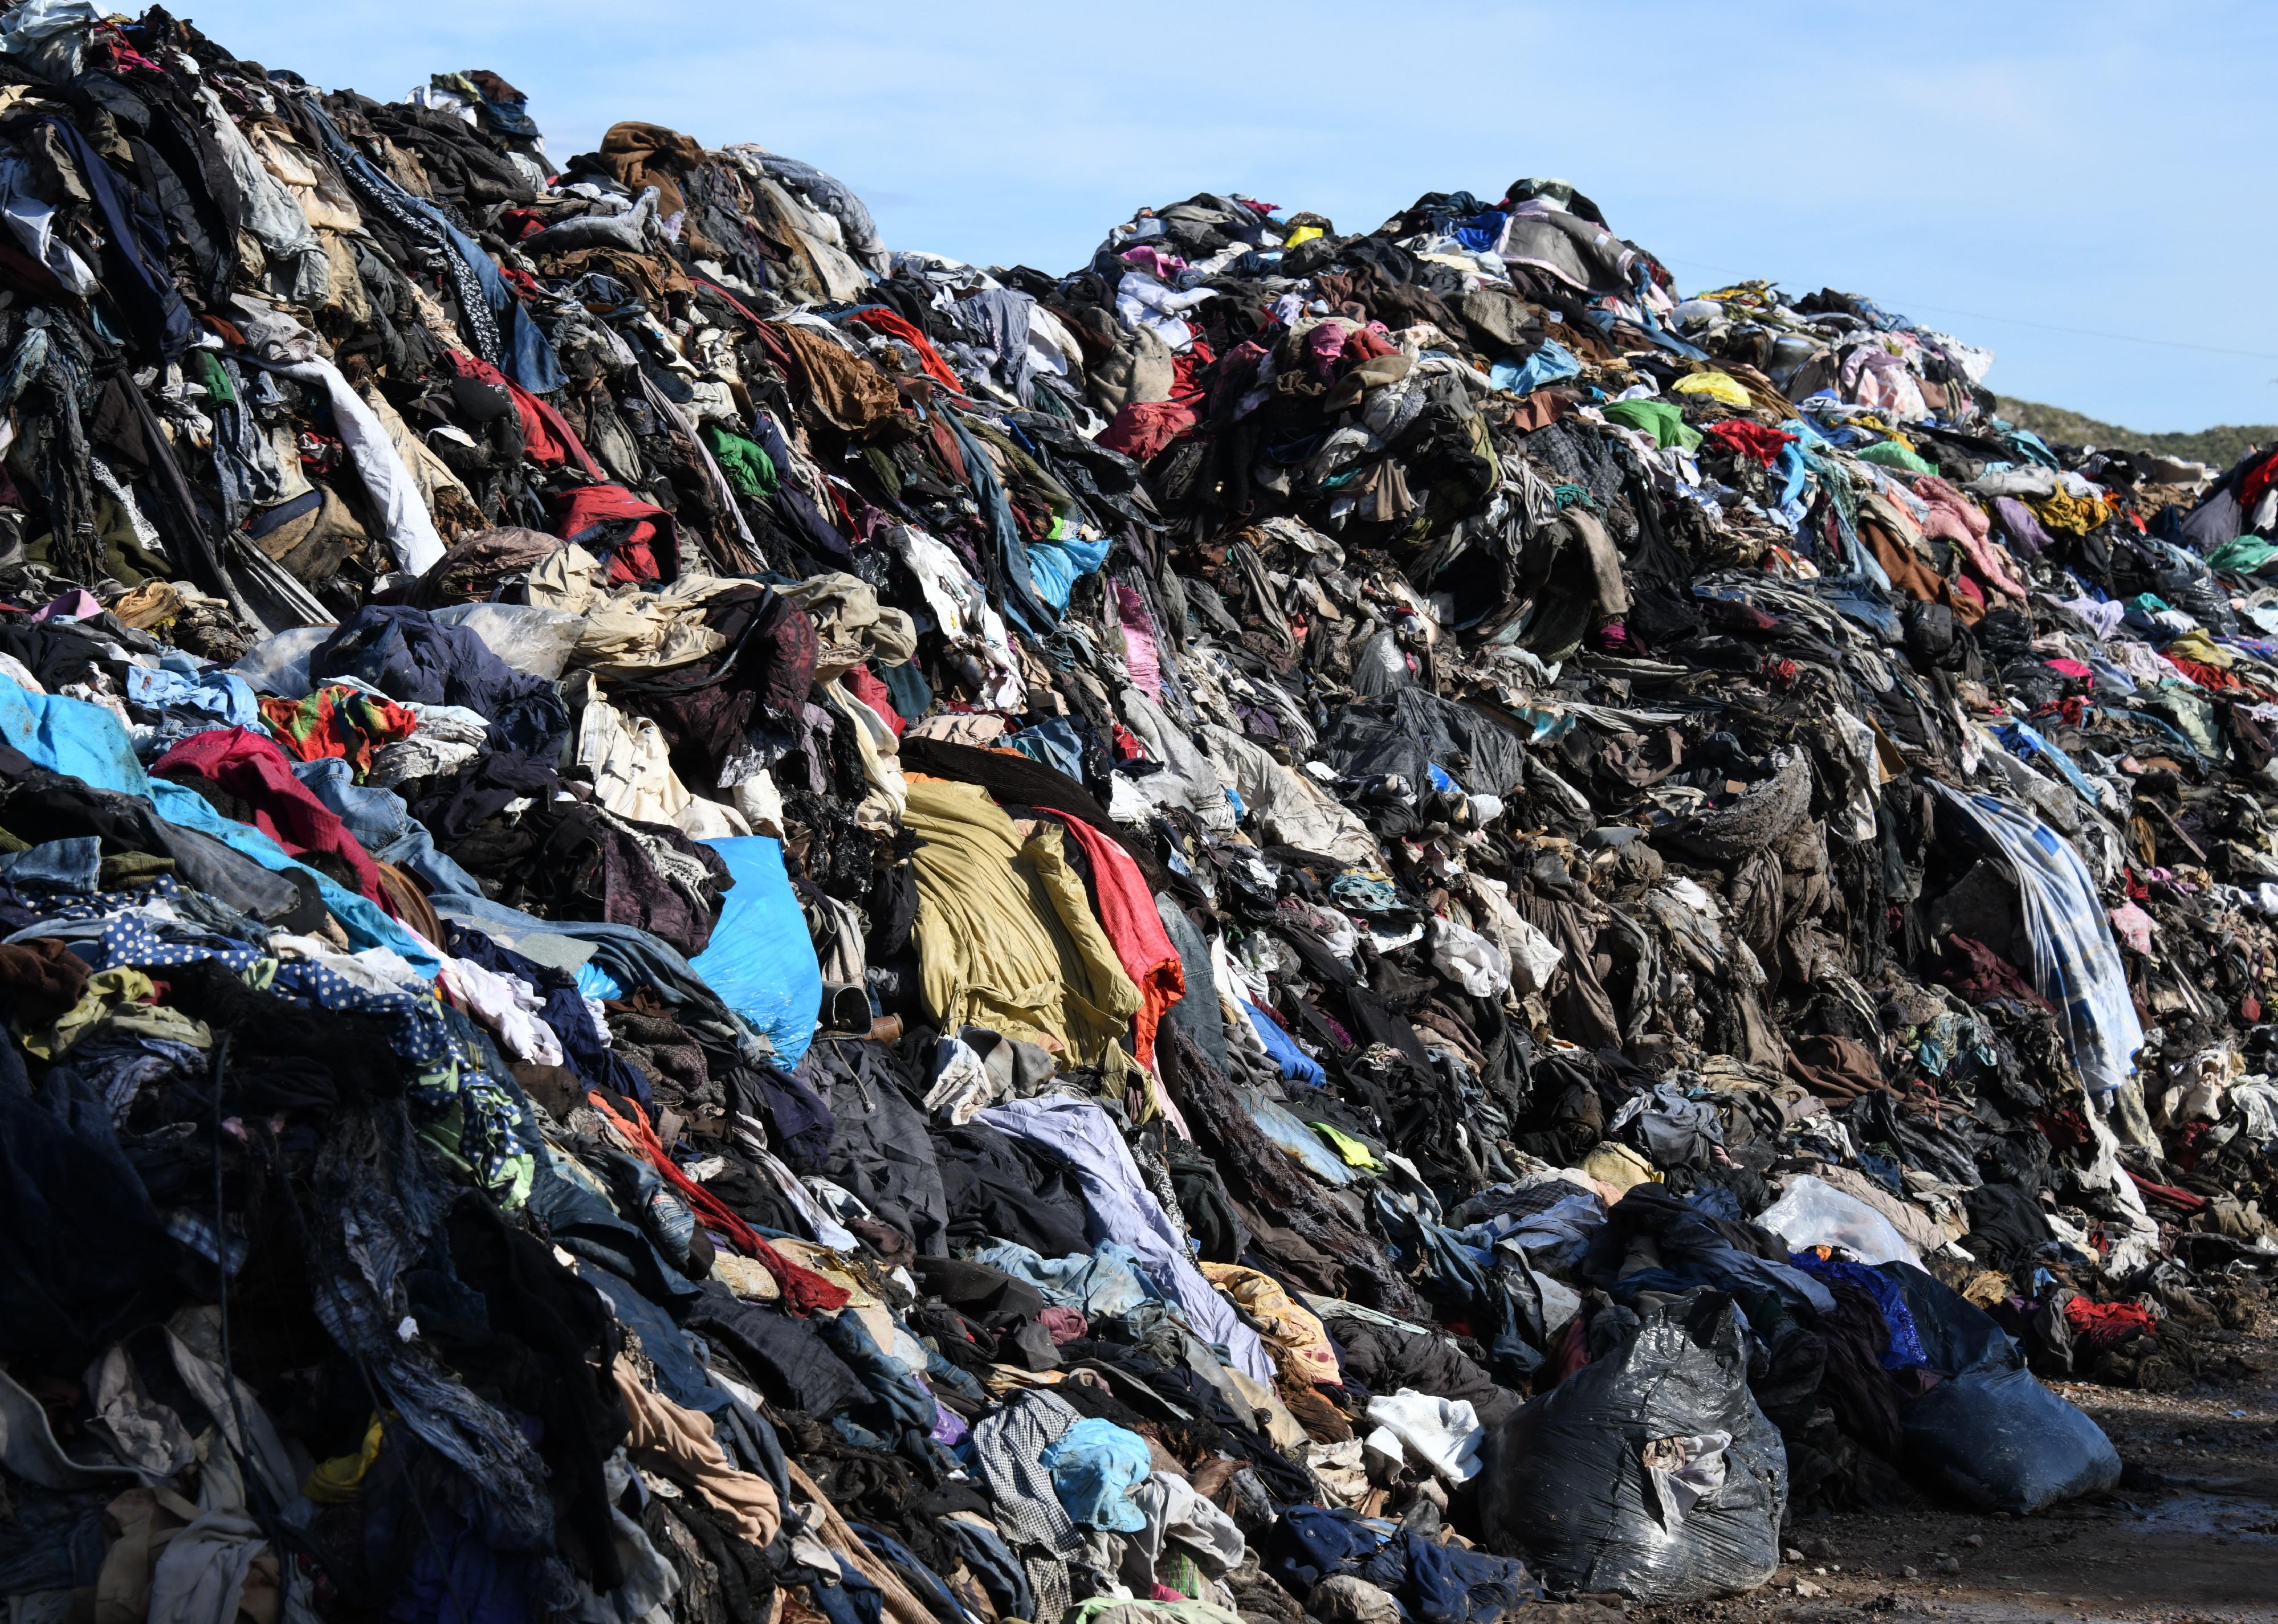 Burnt clothes in a large pile.